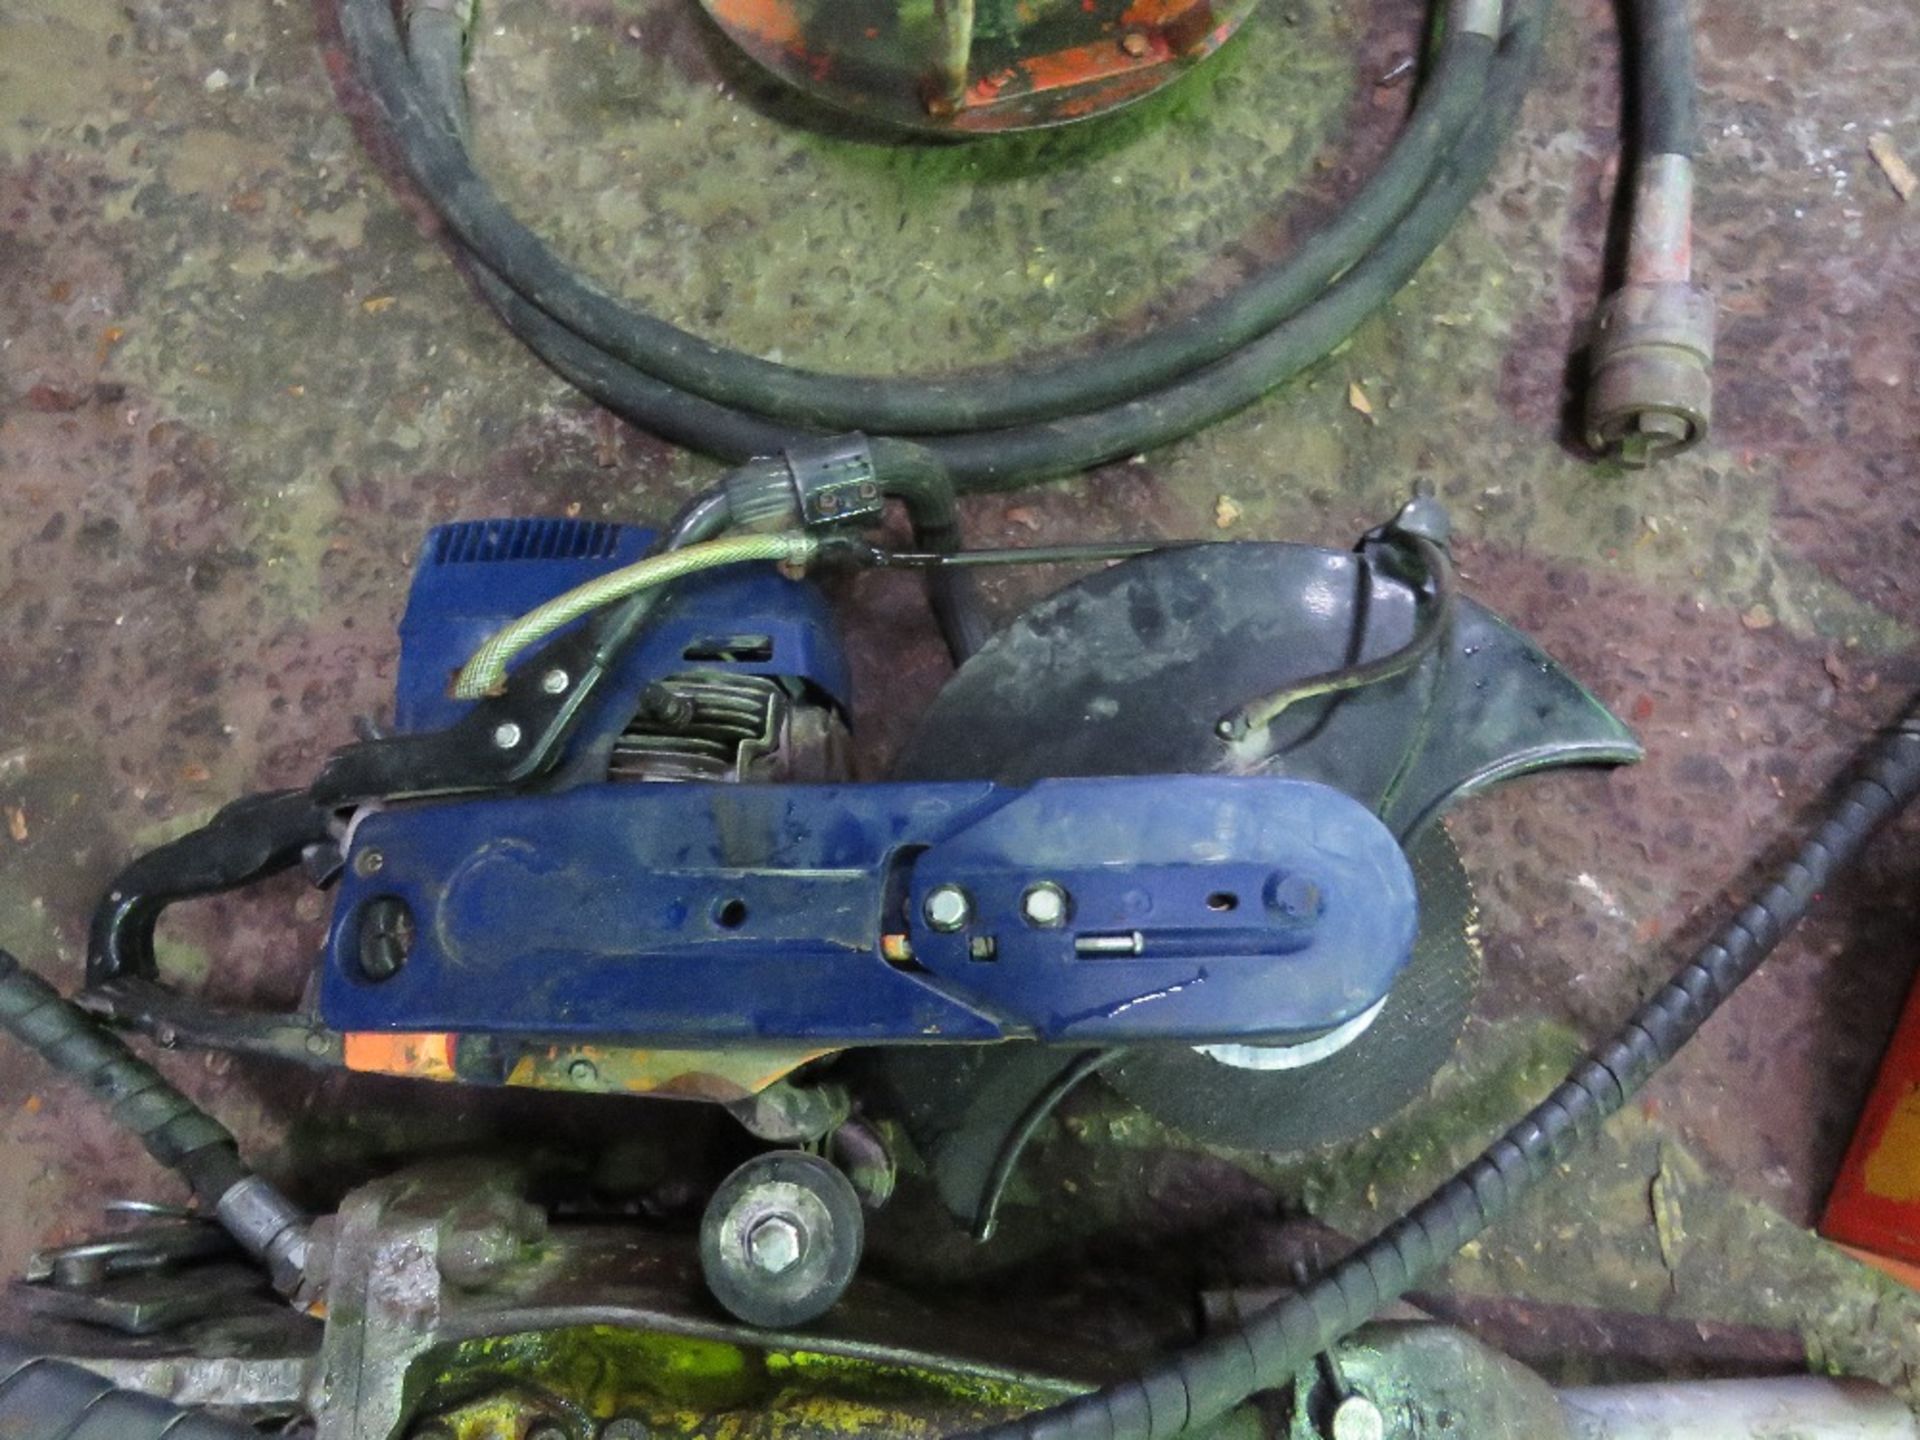 BLUE PETROL ENGINED CUT OFF SAW. - Image 3 of 3